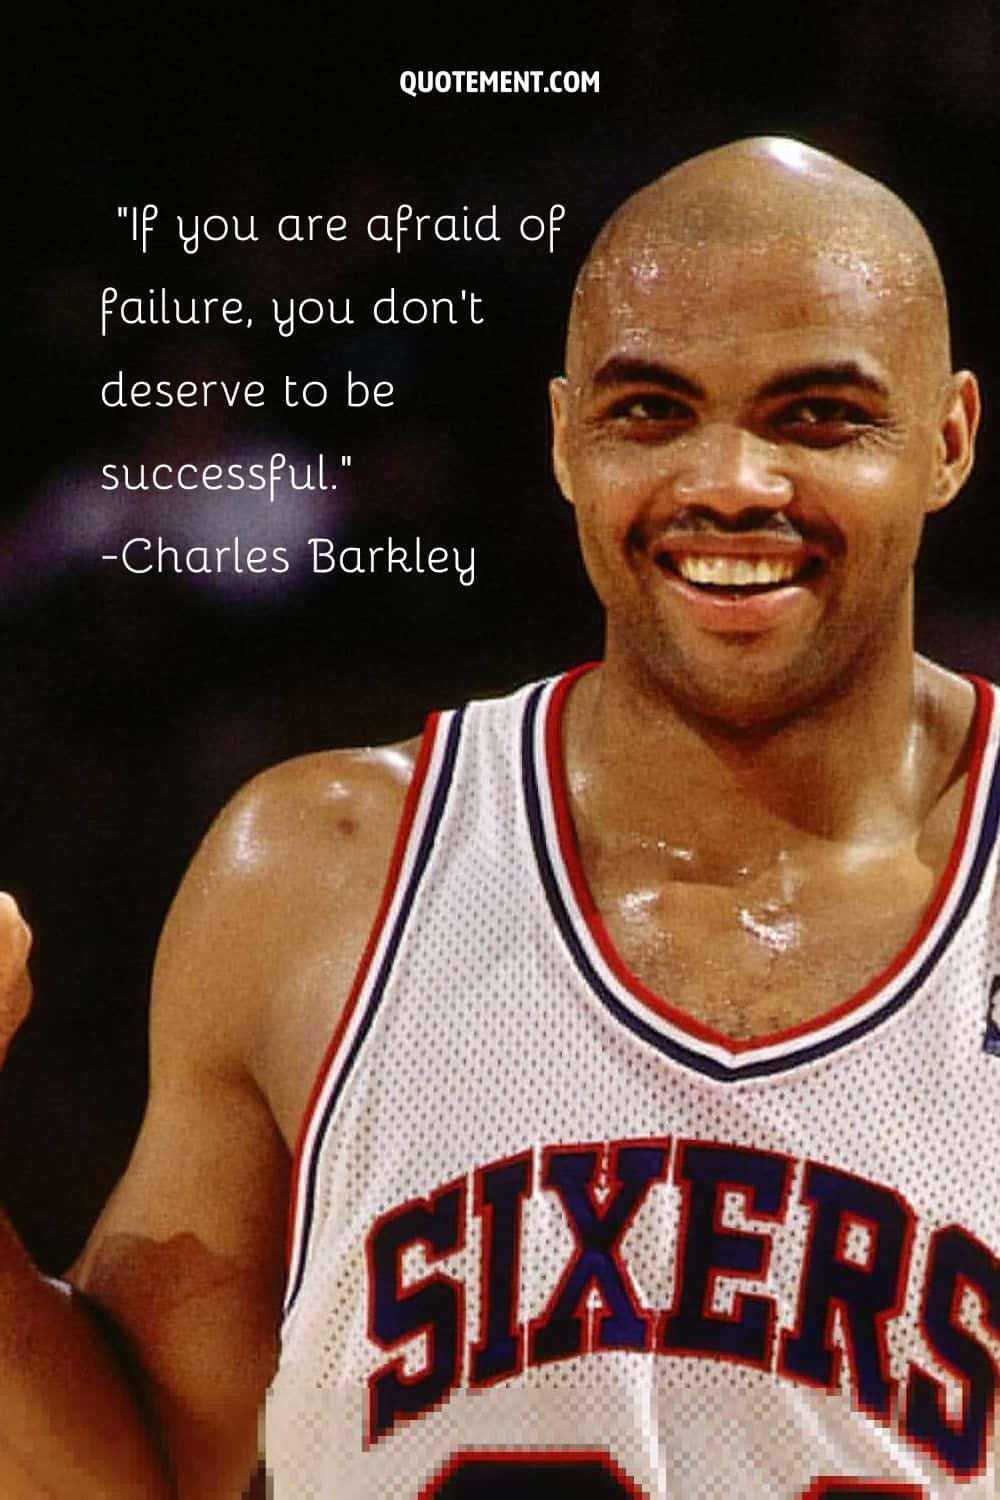 If you are afraid of failure, you don't deserve to be successful